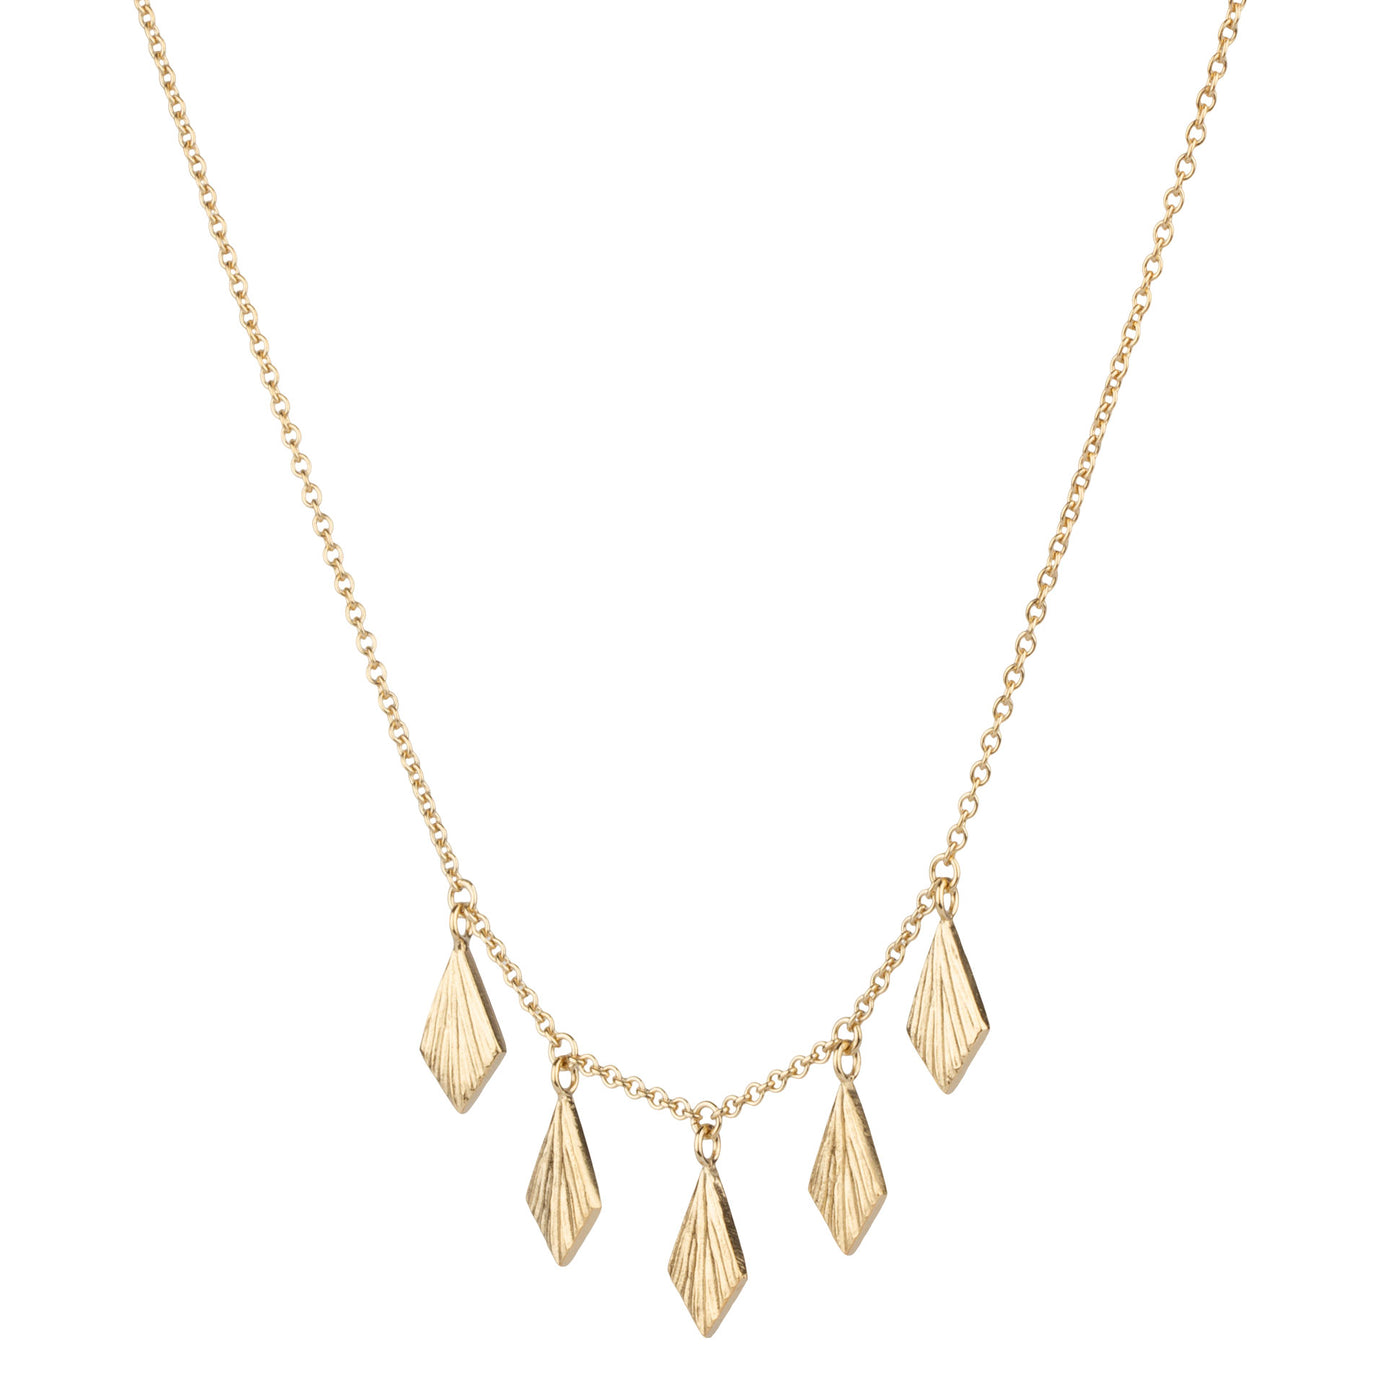 layering bib necklace with five flame fan dangles in gold vermeil side view on a white background